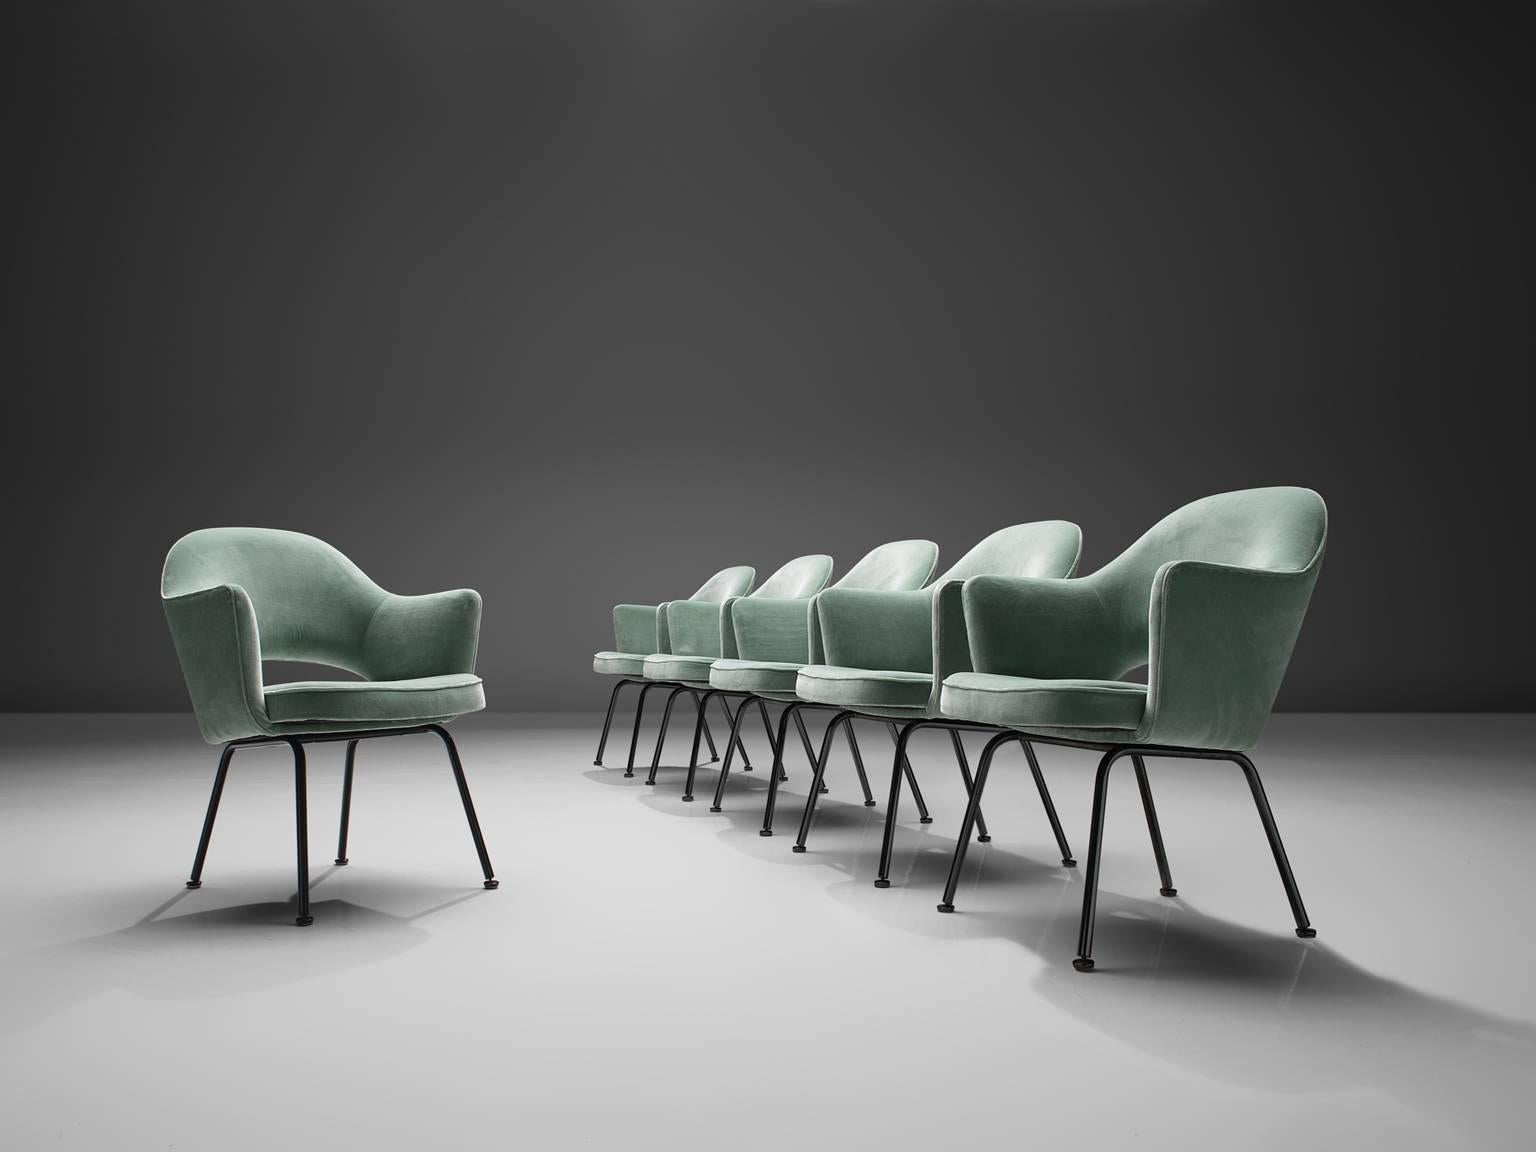 Eero Saarinen for Knoll International, set of 6 chairs, ocean green velvet and metal, United States, 1948. 

Eero Saarinen set of six armchairs. This iconic model is reupholstered in a lovely green velvet. The chairs feature a fluid, sculptural